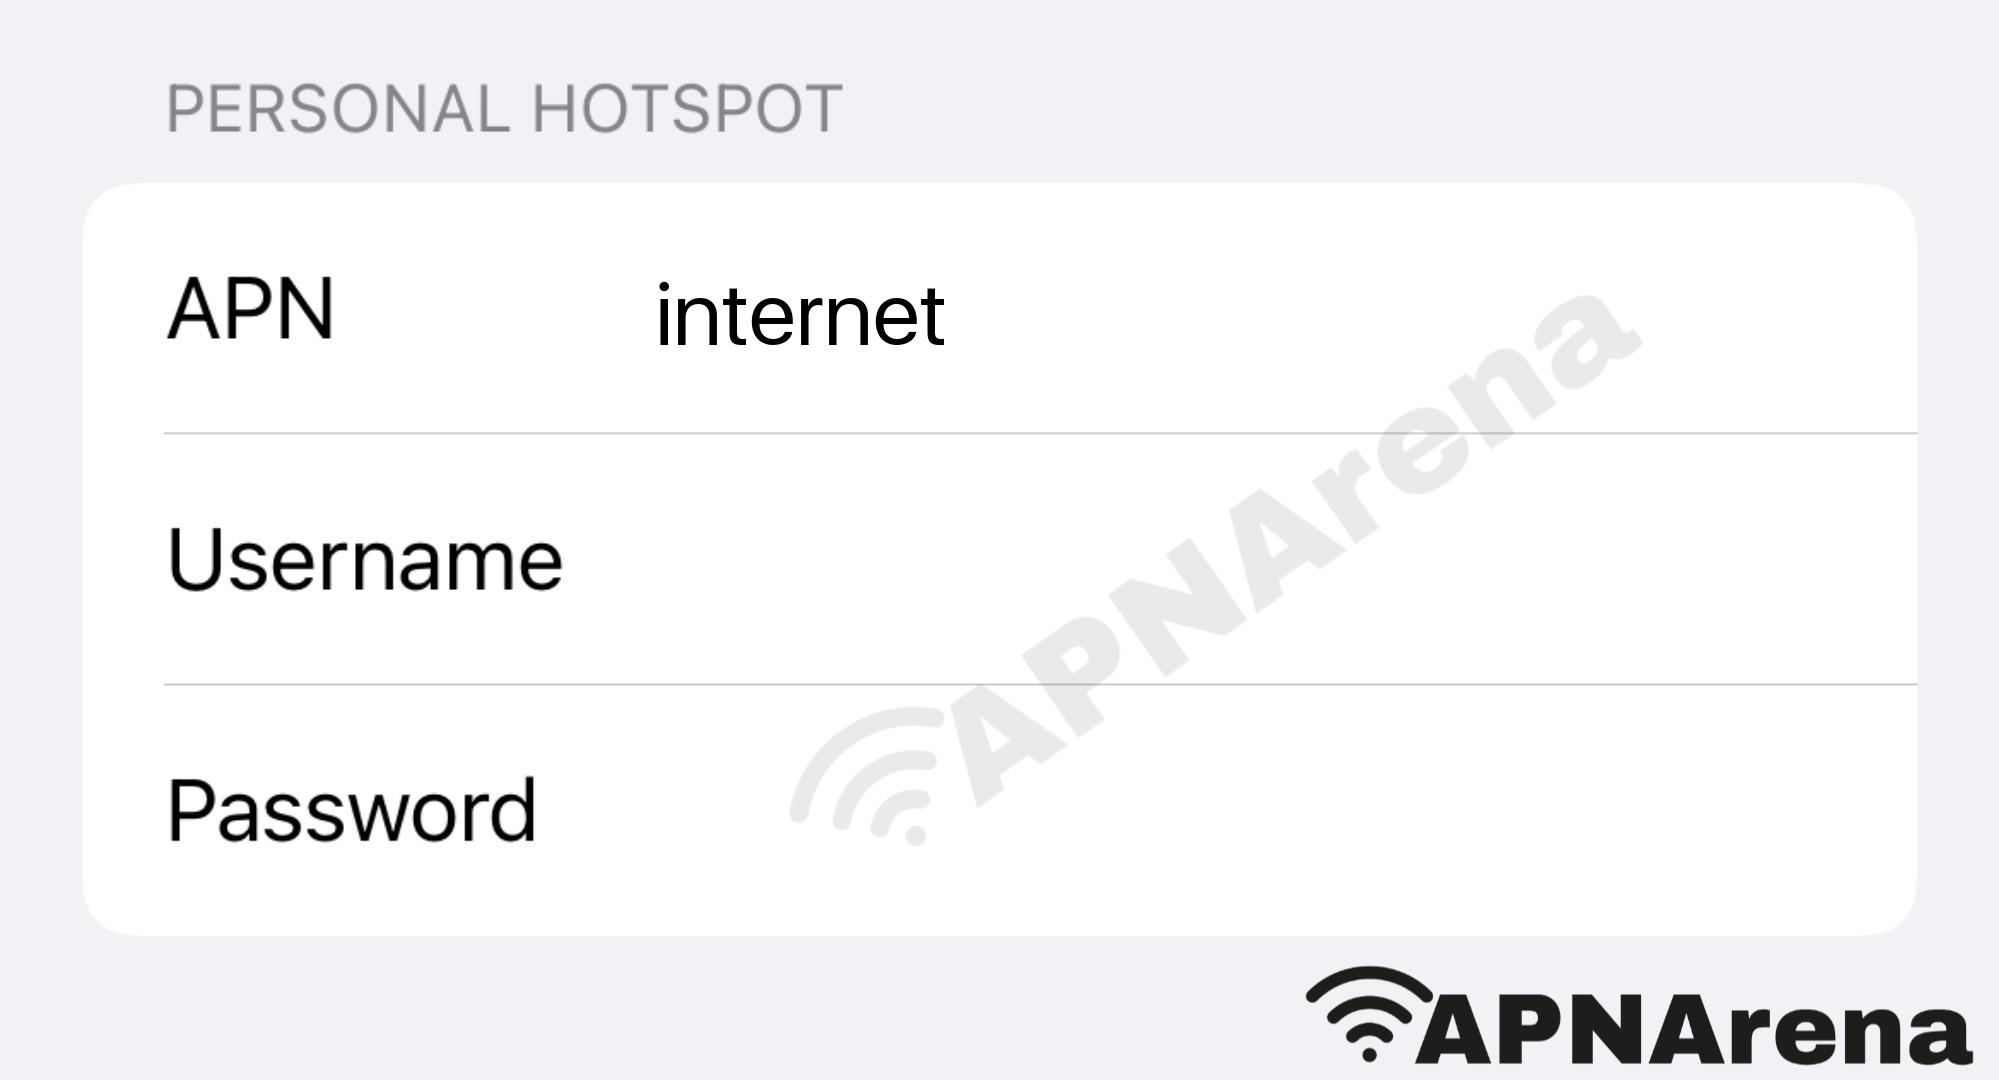 48 (48.ie) Personal Hotspot Settings for iPhone